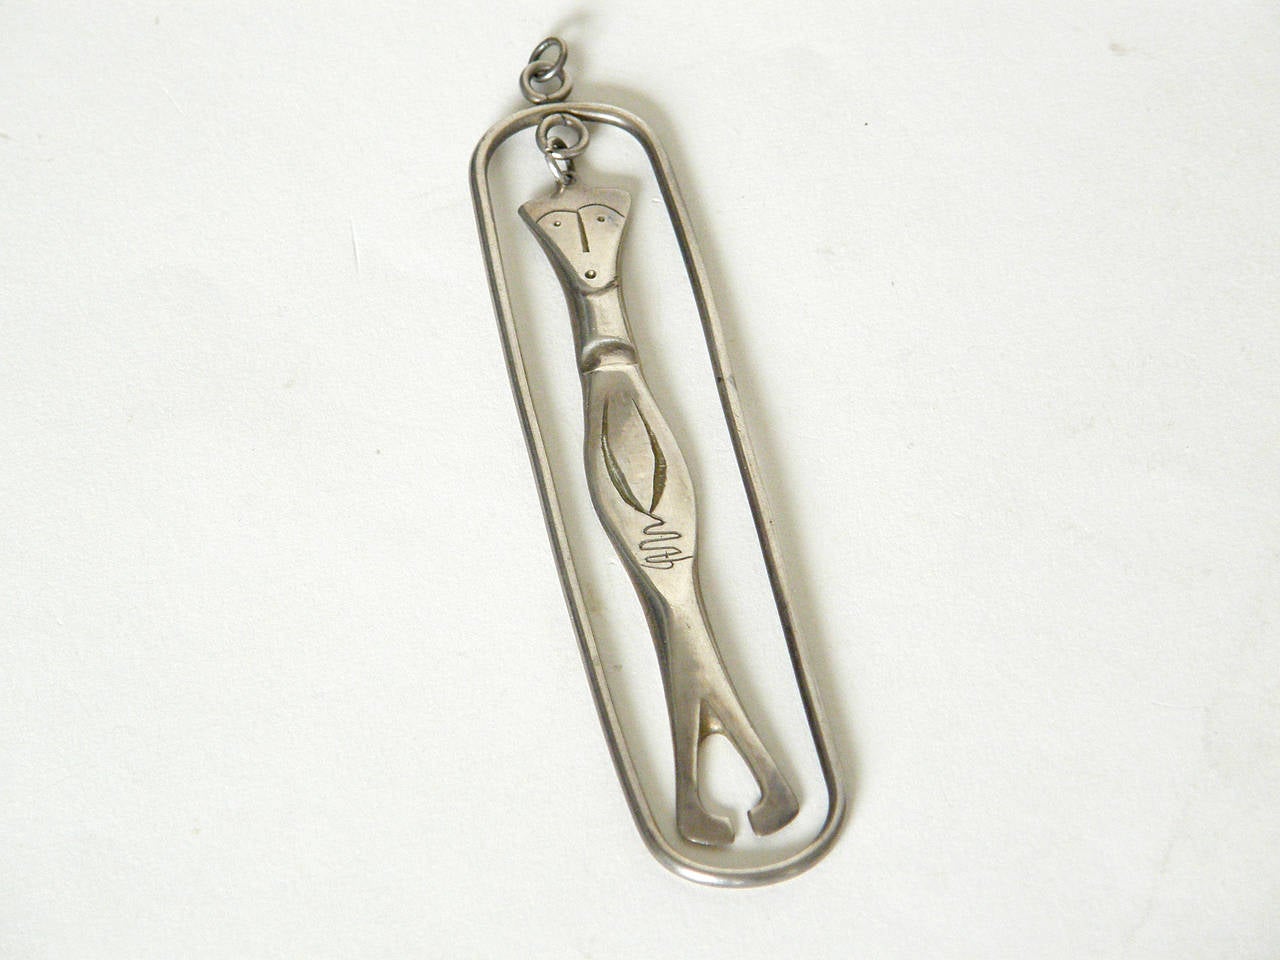 This sterling pendant of a man with his hands clasped hanging inside a silver frame was made by the husband and wife jewelers Irvin and Bonnie Burkee. It has a playful, modernist style typical of their work from the mid-20th century.

Please